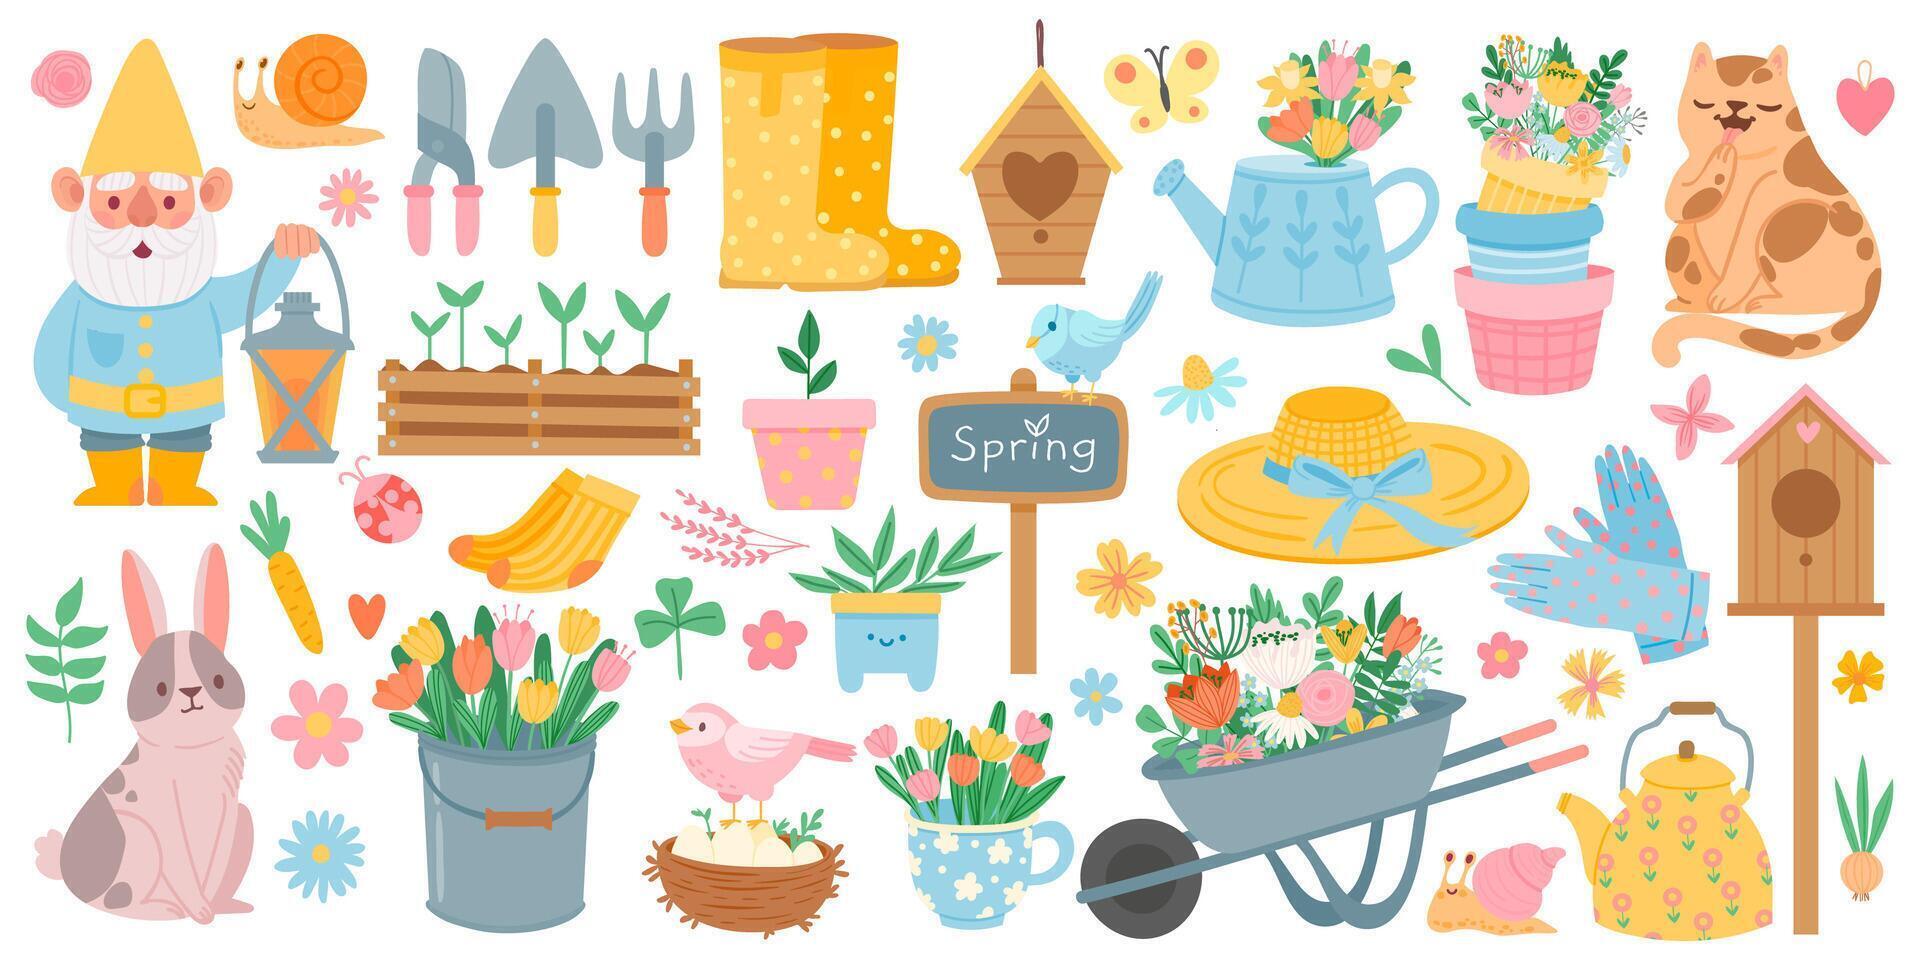 Spring elements. Blooming flower, cute animals and birds. Springtime garden decoration, birdhouse, tool and plants, drawn cartoon vector set